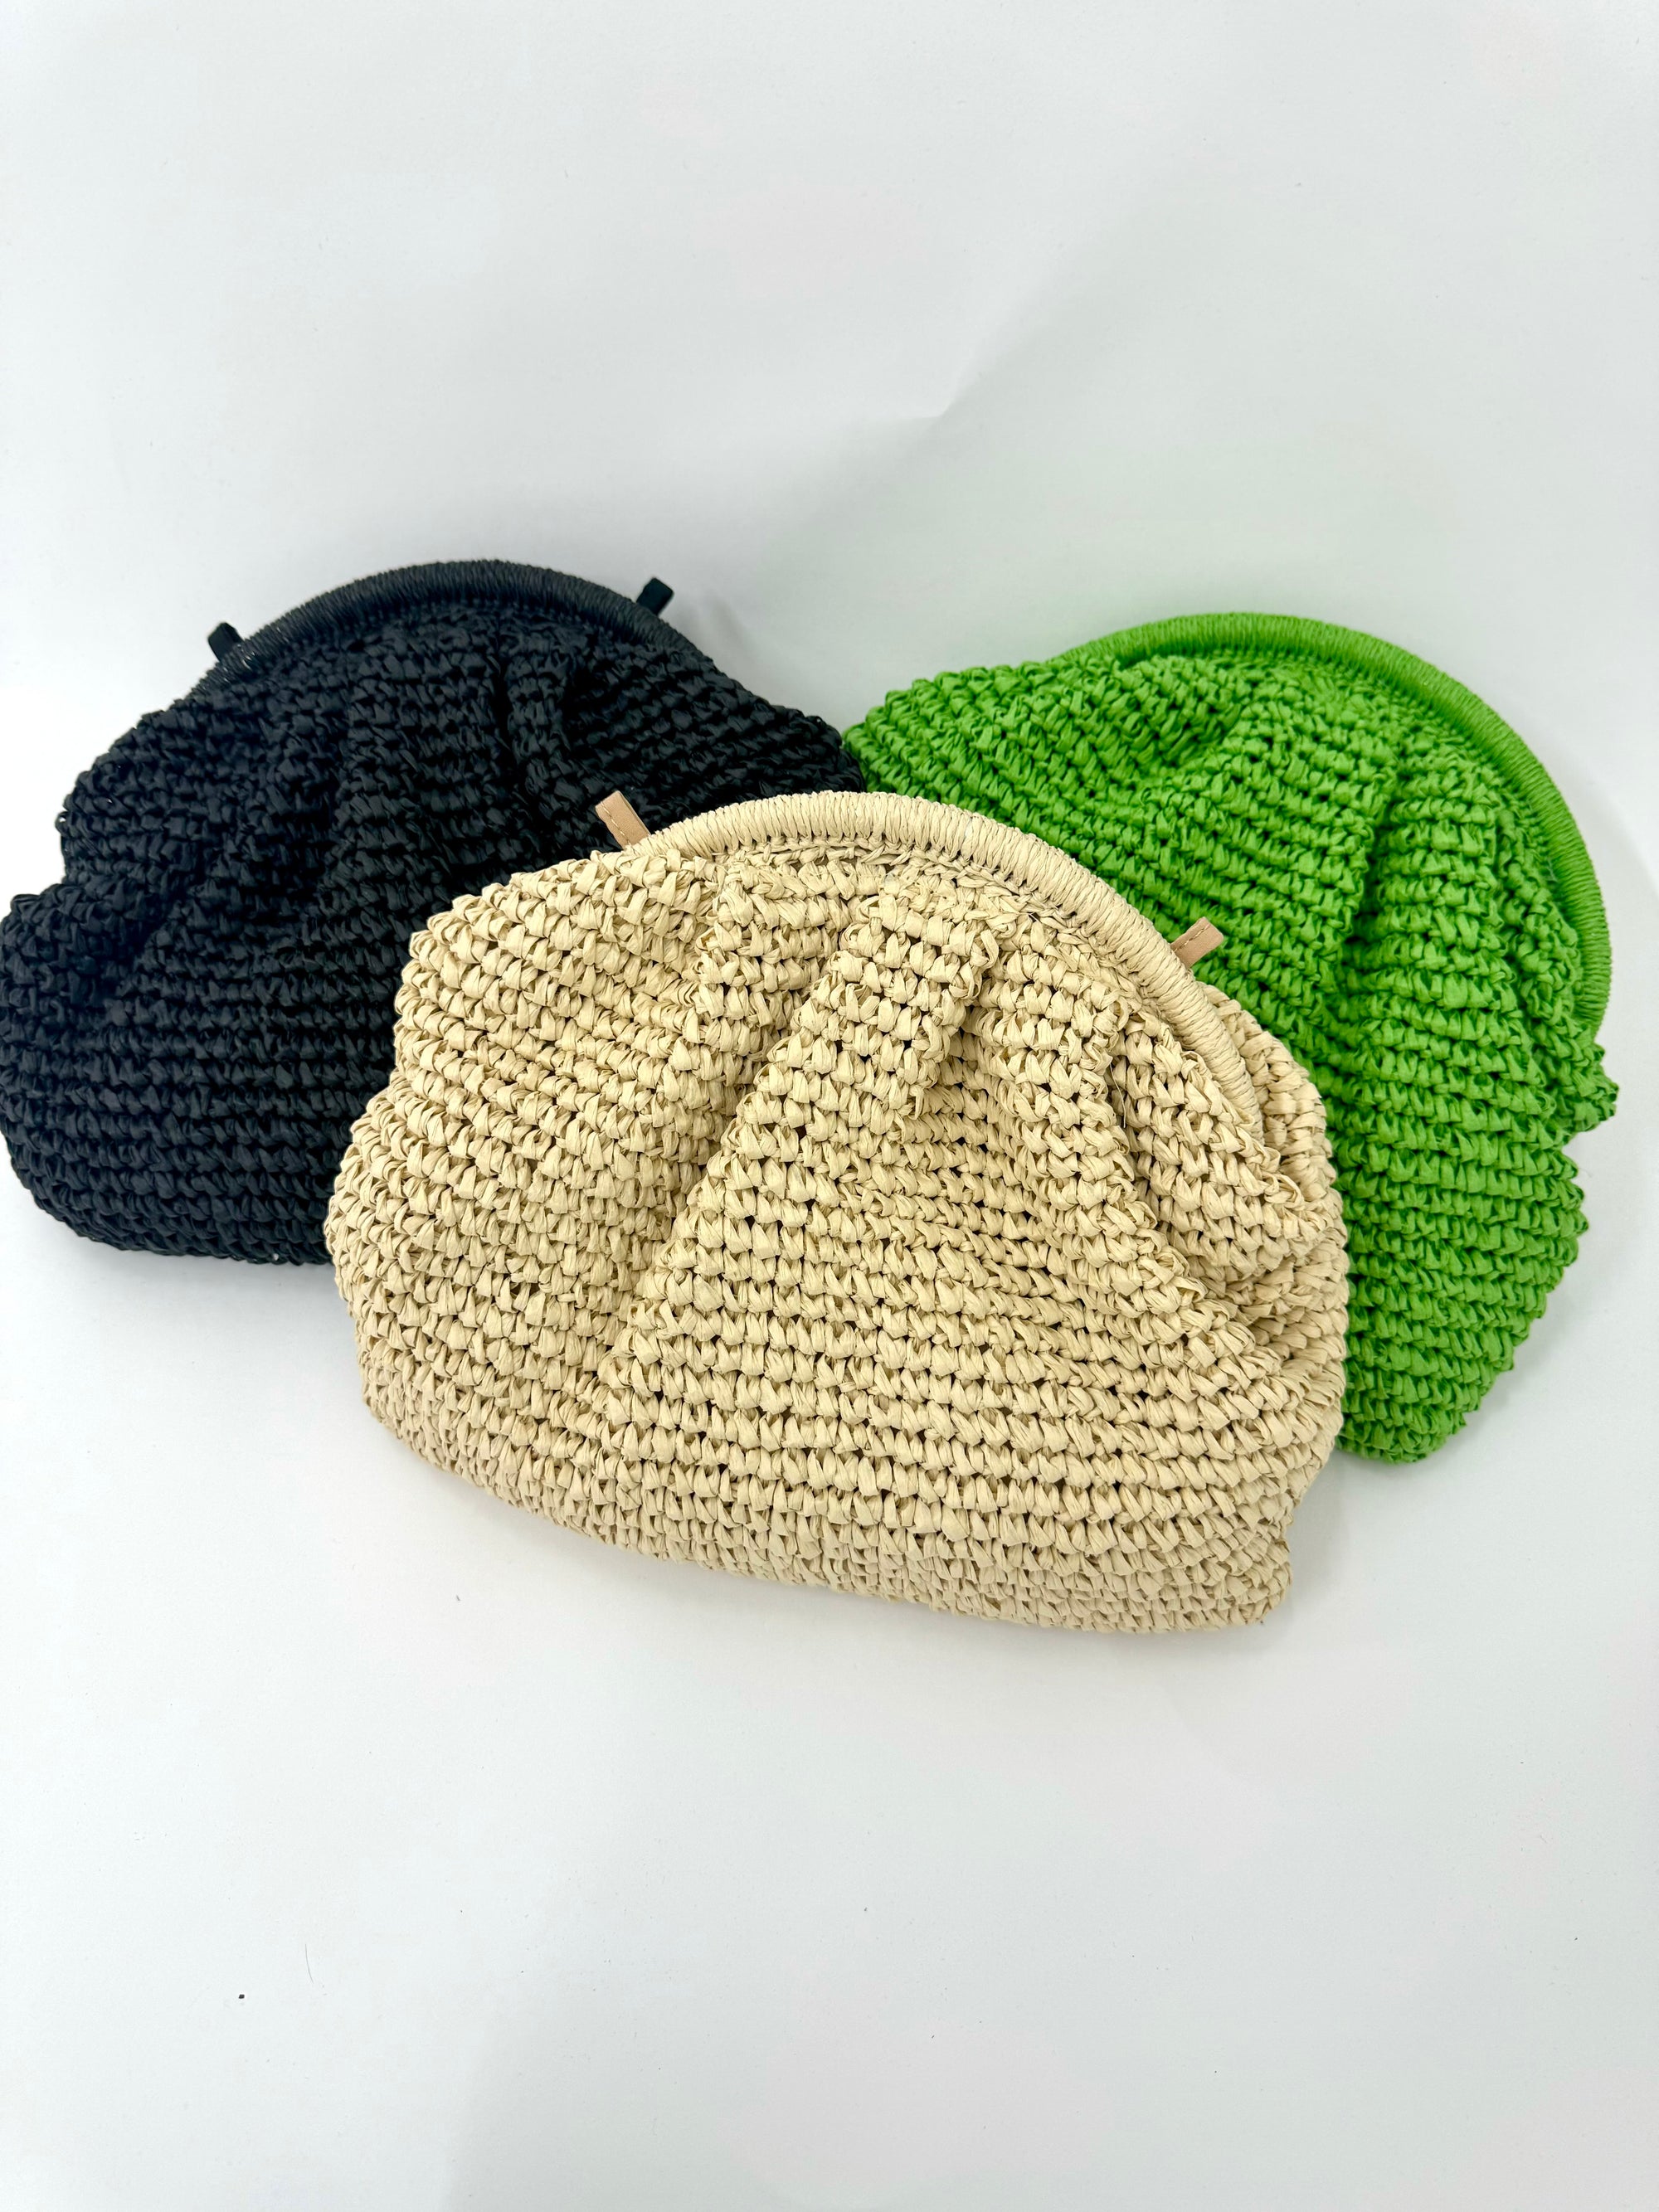 Woven Straw All Over Chic Clutch Bag